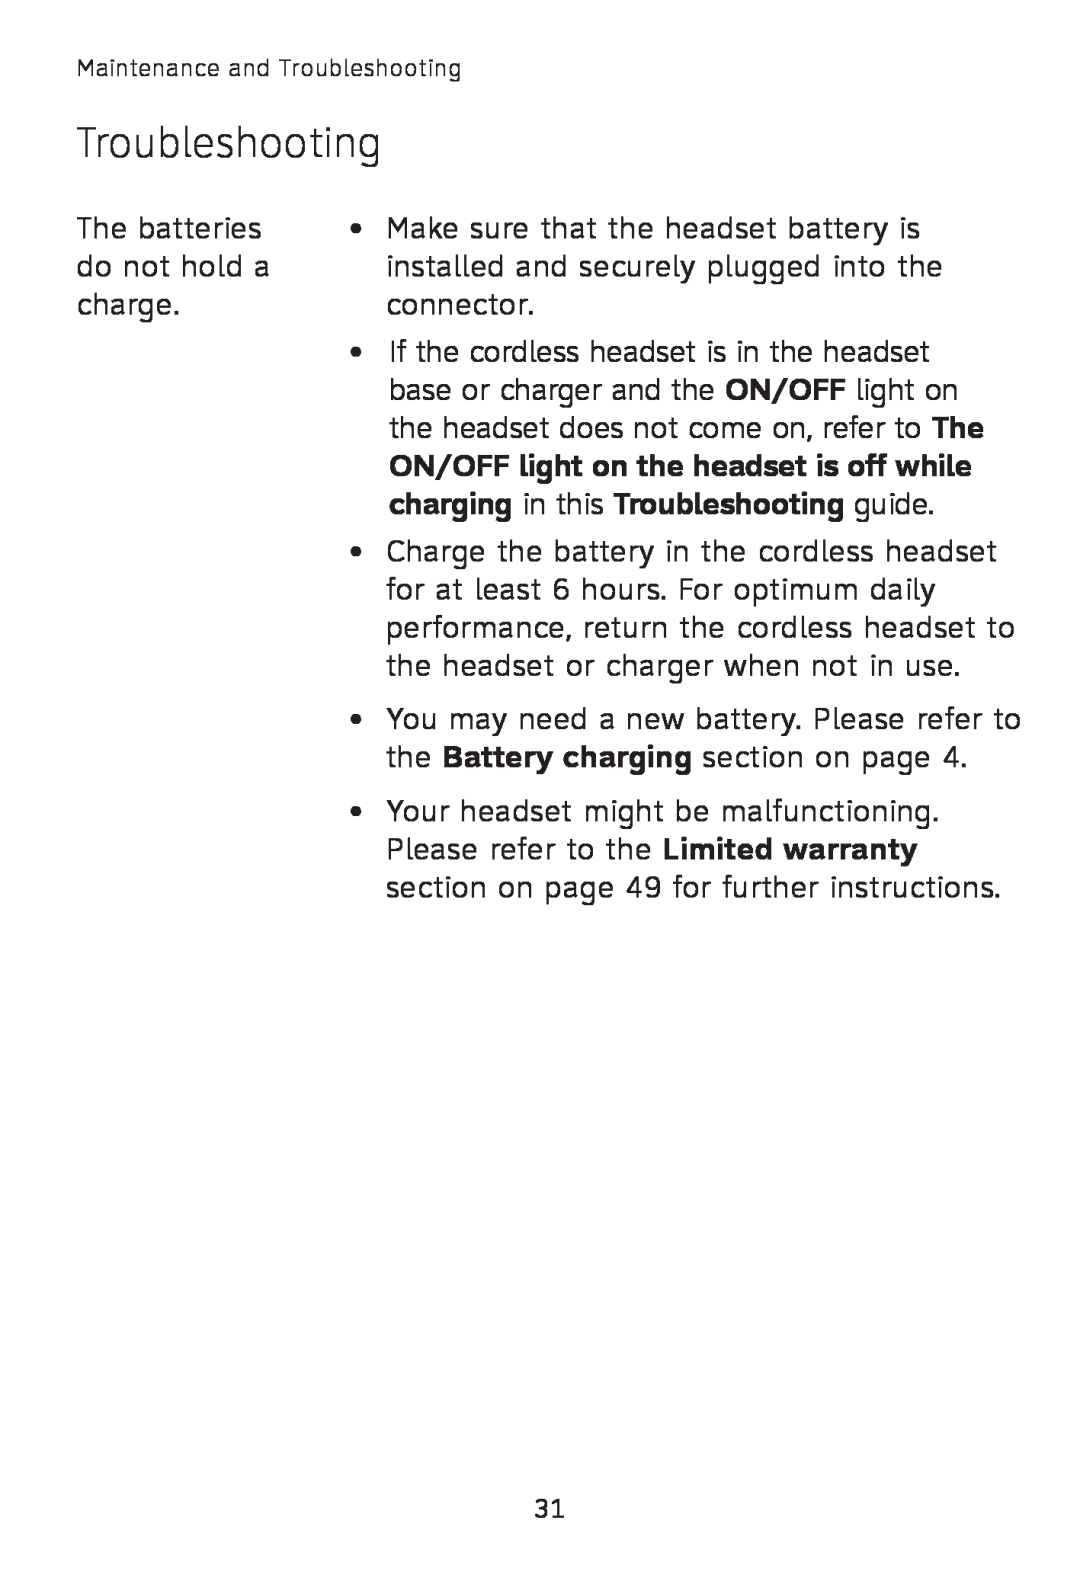 AT&T TL7600 user manual ON/OFF light on the headset is off while, charging in this Troubleshooting guide 